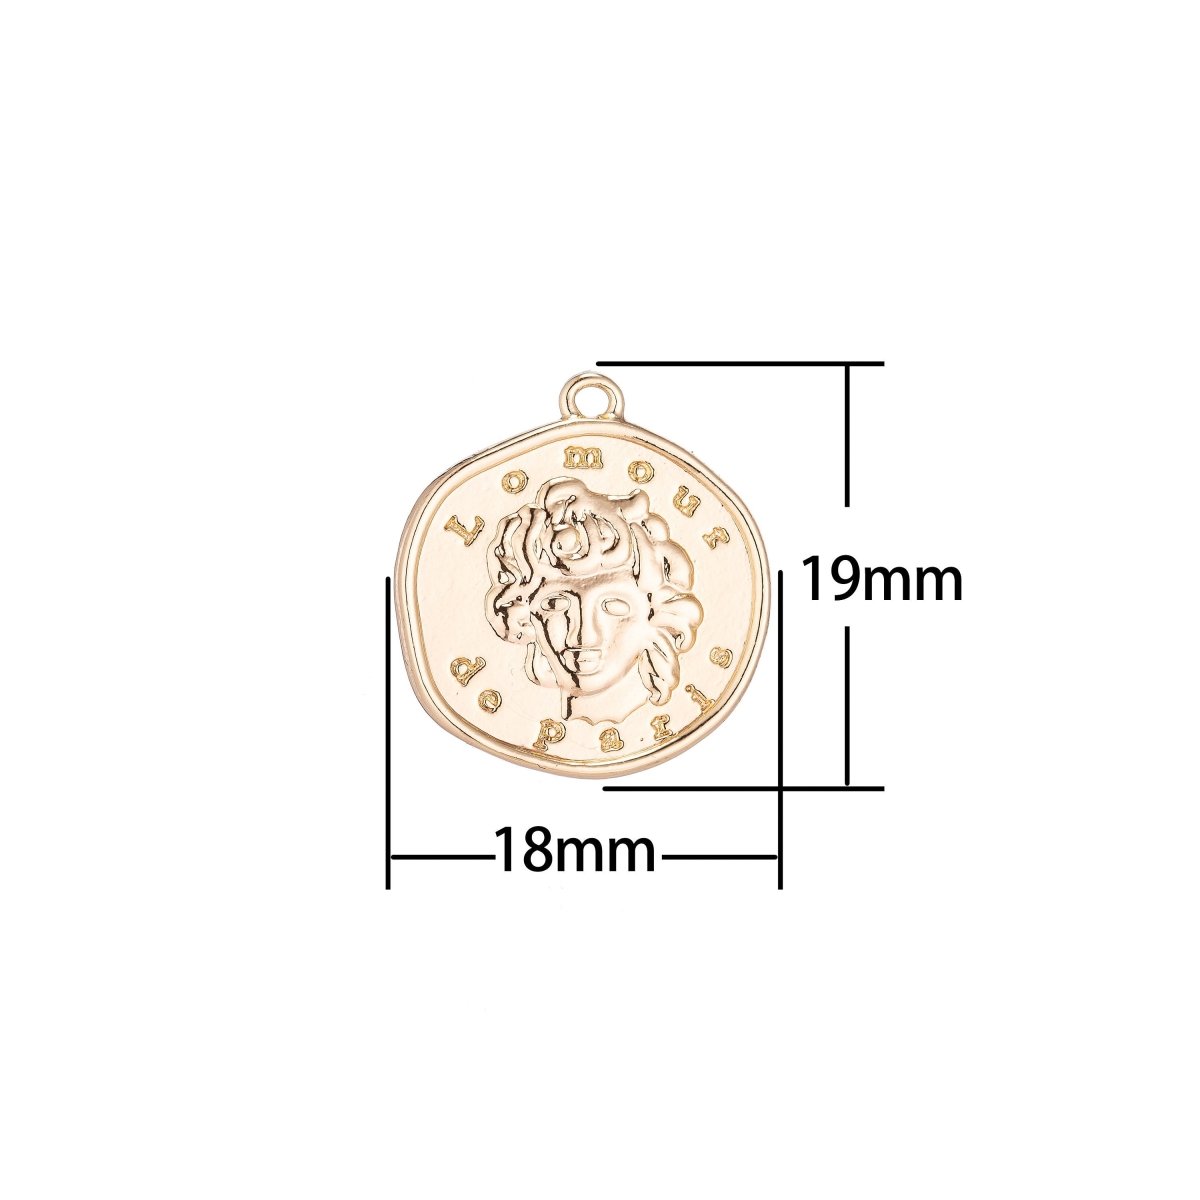 L'Amour de Paris Gold Filled Pendant Coin Medallion Charm for Bracelet Dainty Delicate Necklace Earring Findings for Jewelry Making - DLUXCA